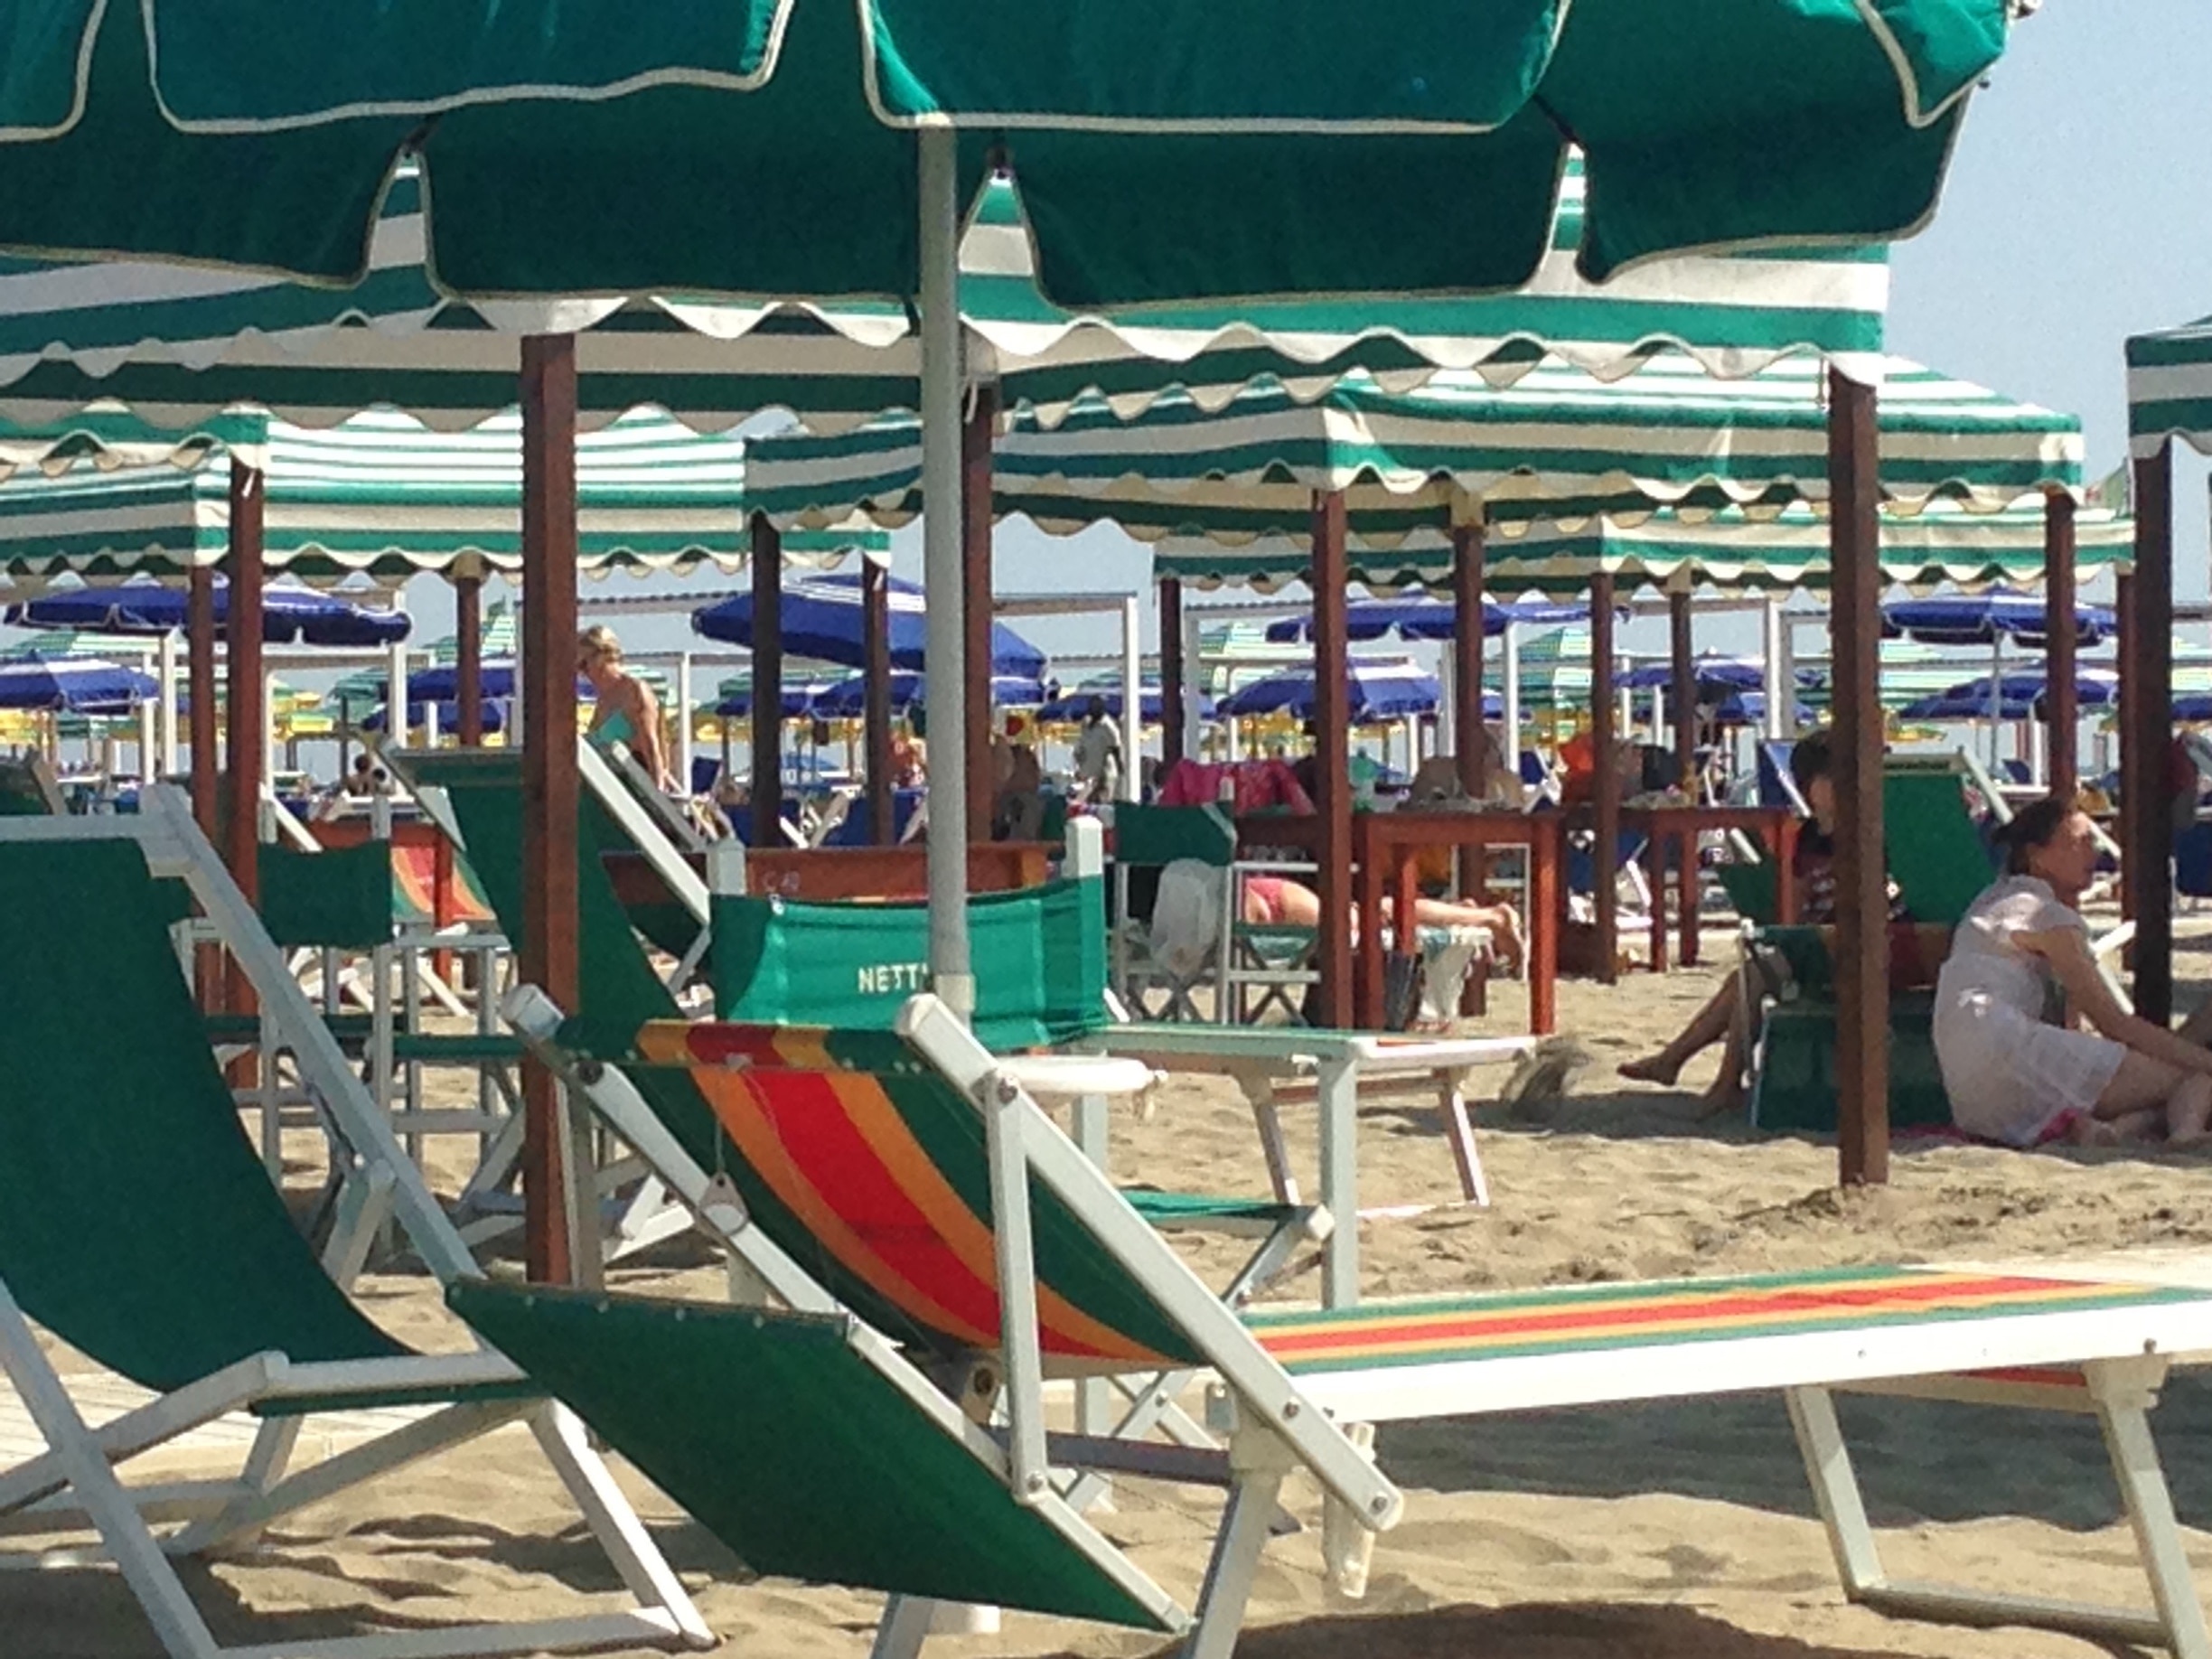 Beaches of Marina di Pietrasanta are lined with beach clubs where you must pay a small fee for access. They range from just a few euros, like this one, to the more luxurious ones that are quite expensive. Still makes for a lovely day at the beach.